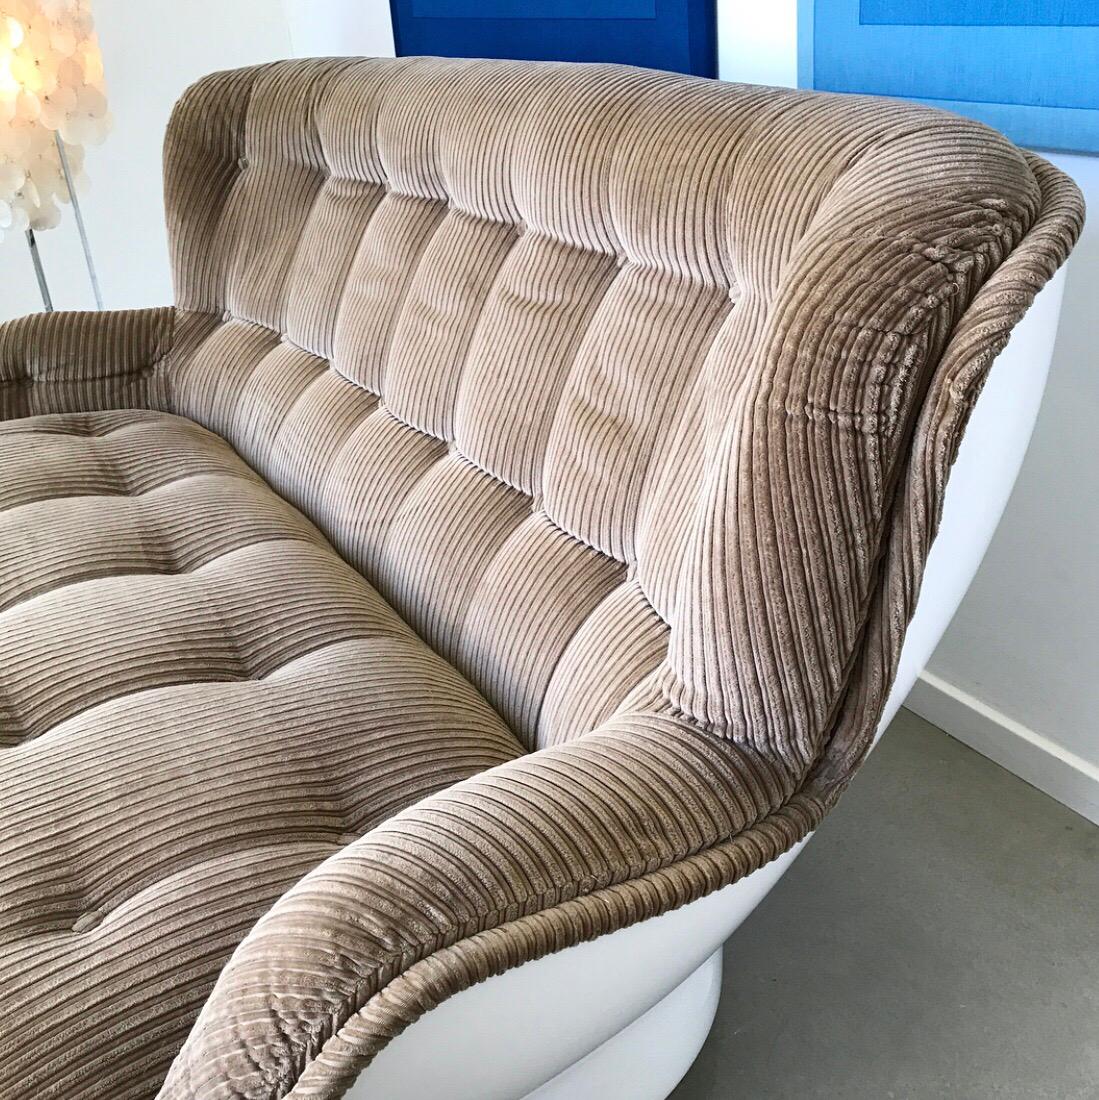 Rare sofa by Marque Dupont for Airborne International.

A real Space Age contemporary piece of French design from 1970. 

All original fiberglass shell with original light brown corduroy upholstery. Both cushions and the shell is in an excellent